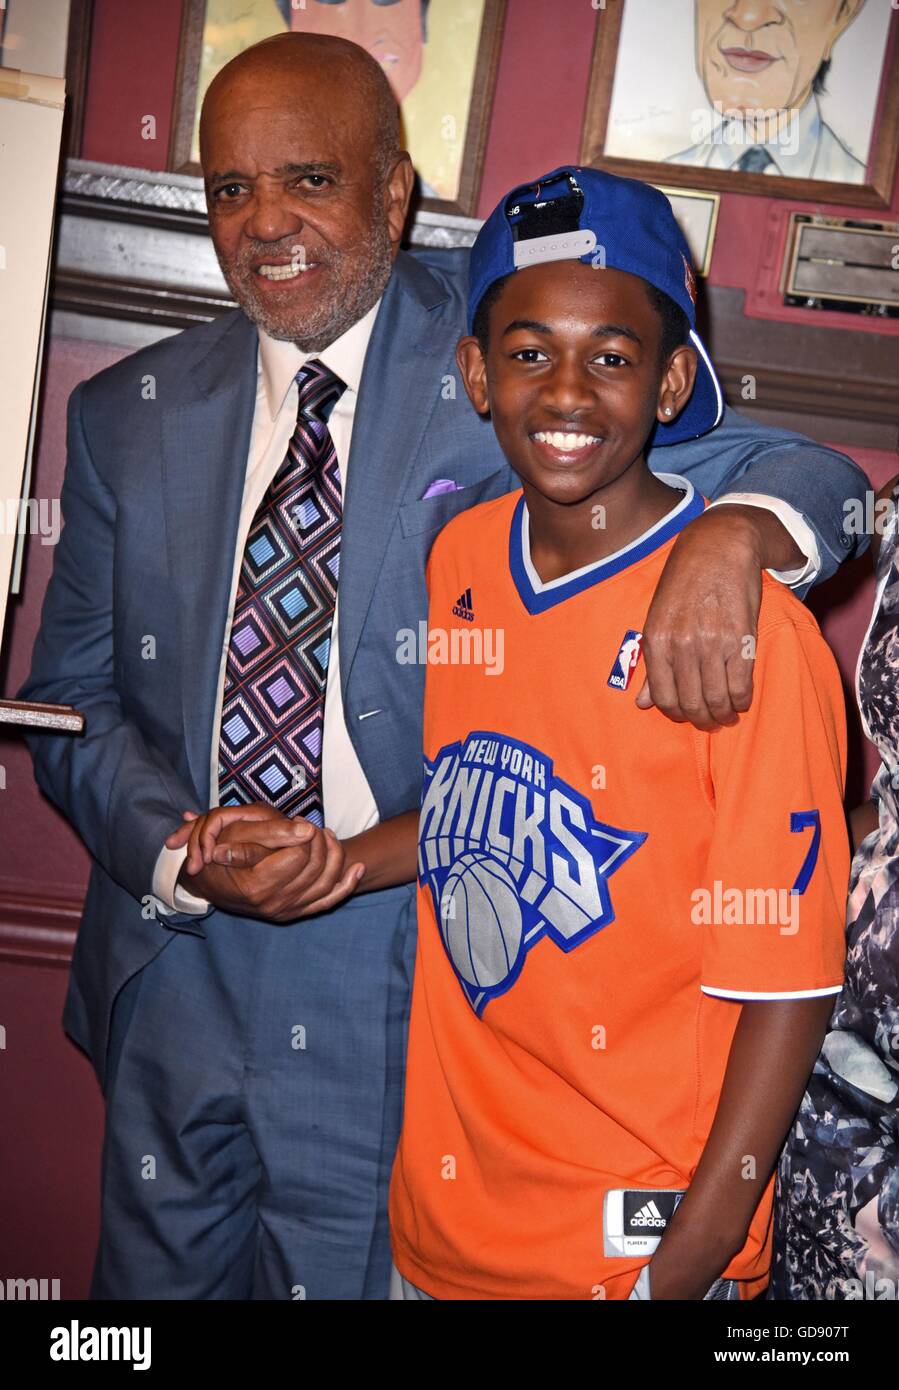 New York, NY, USA. 13th July, 2016. Berry Gordy, Leon Outlaw Jr. at a public appearance for Berry Gordy Portrait Unveiled at Sardi's, Sardi's Restaurant, New York, NY July 13, 2016. Credit:  Derek Storm/Everett Collection/Alamy Live News Stock Photo